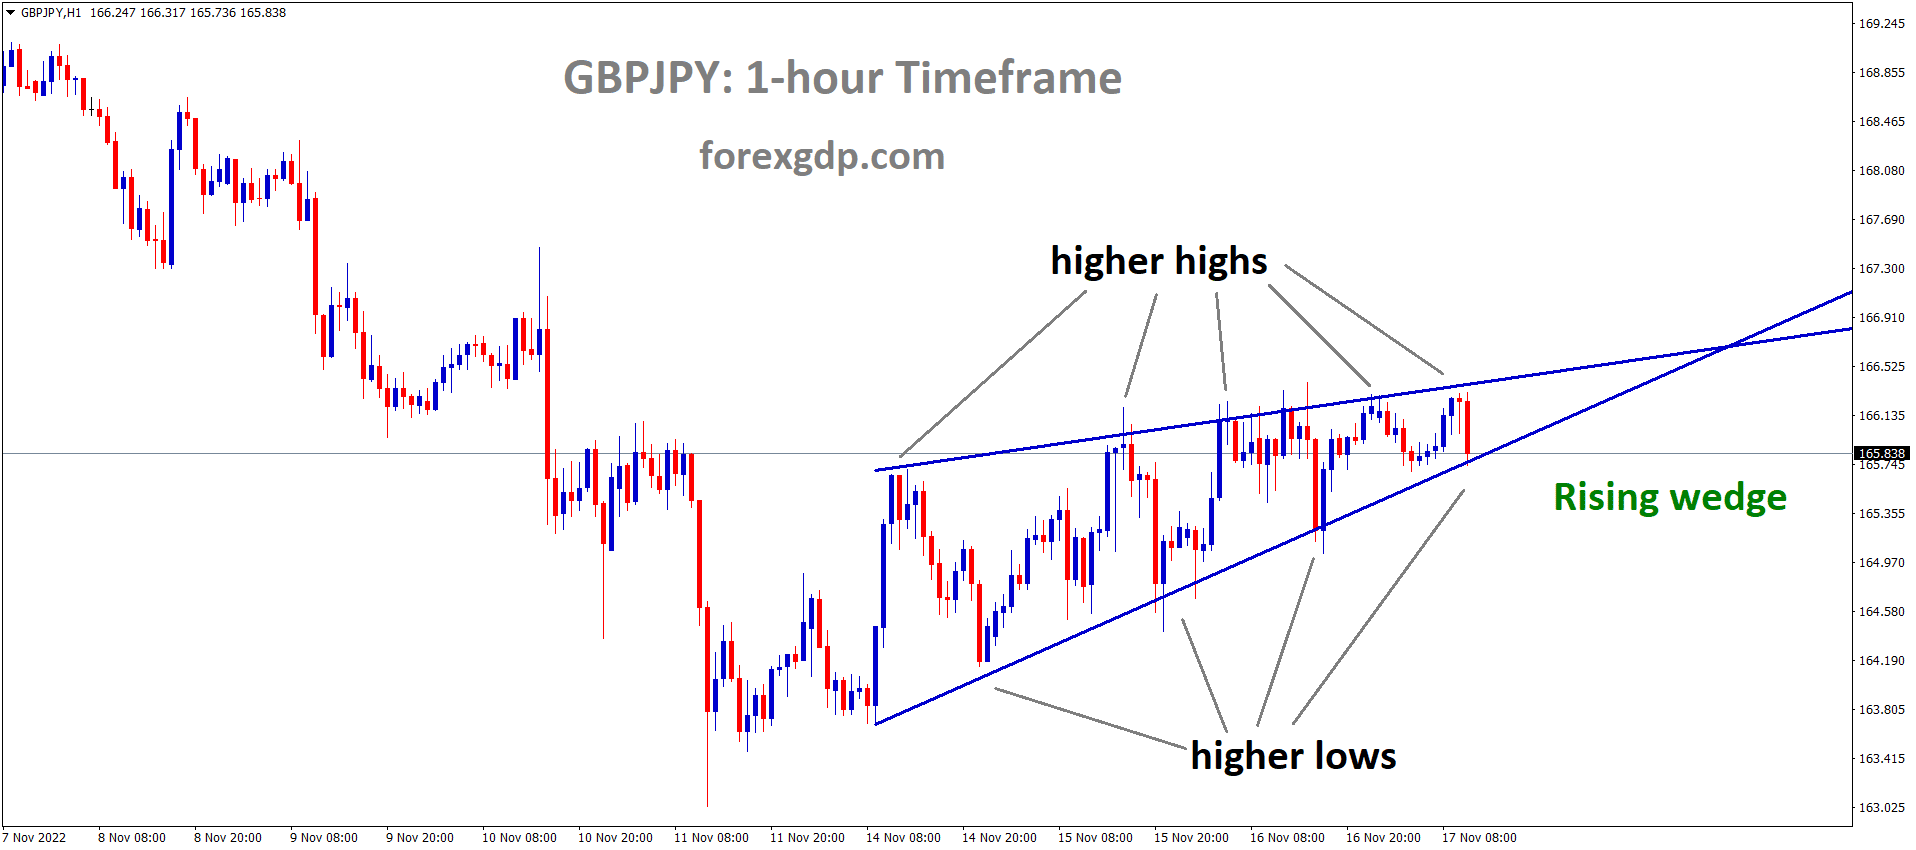 GBPJPY is moving in the Rising wedge pattern and the market has reached the higher low area of the pattern